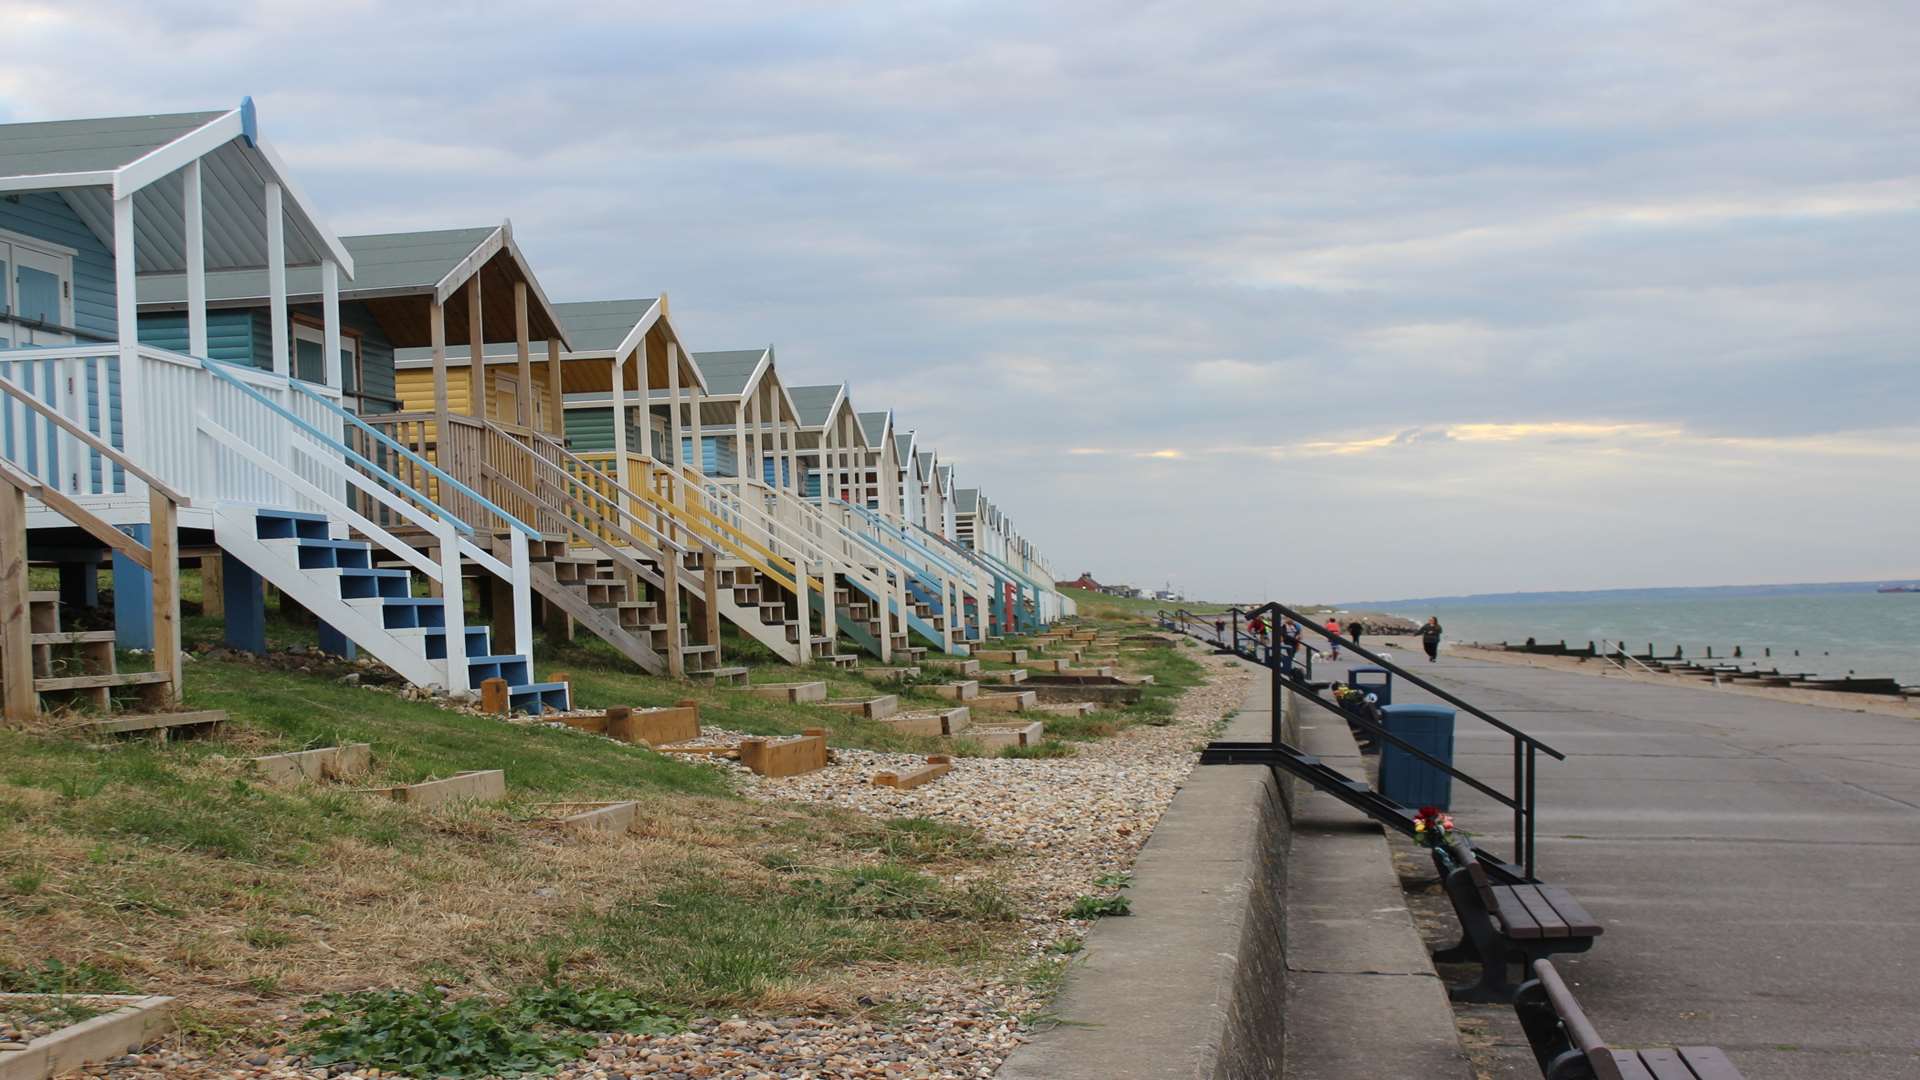 Beach huts and promenade along The Leas at Minster